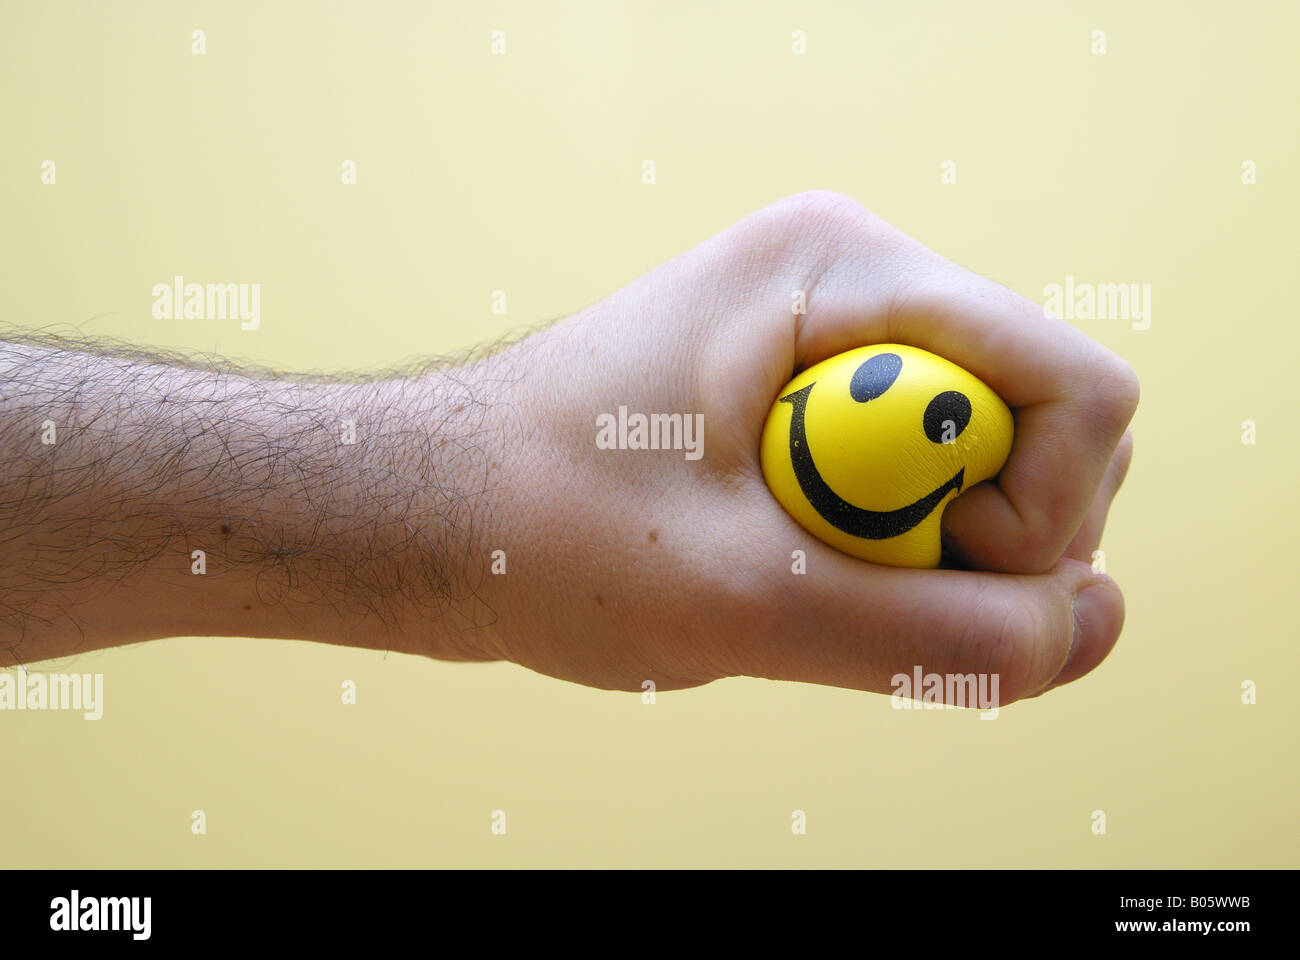 A hand clenches a rubber stress ball.  A happy face printed on the ball can be seen between the fingers of the hand. Stock Photo